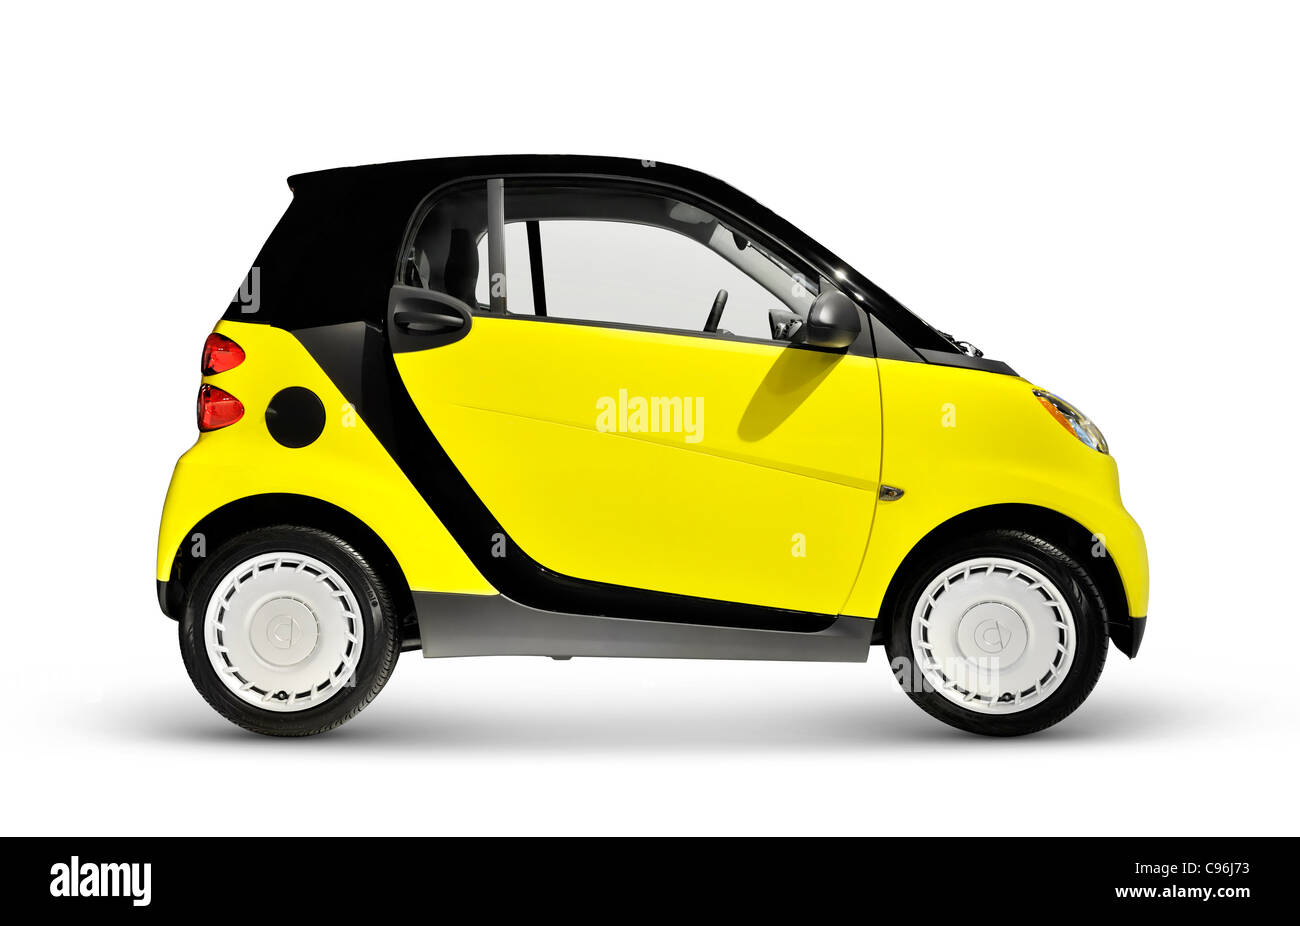 2008 Smart Fortwo fuel efficient mini city car. Side view. Isolated with clipping path on white background. Stock Photo